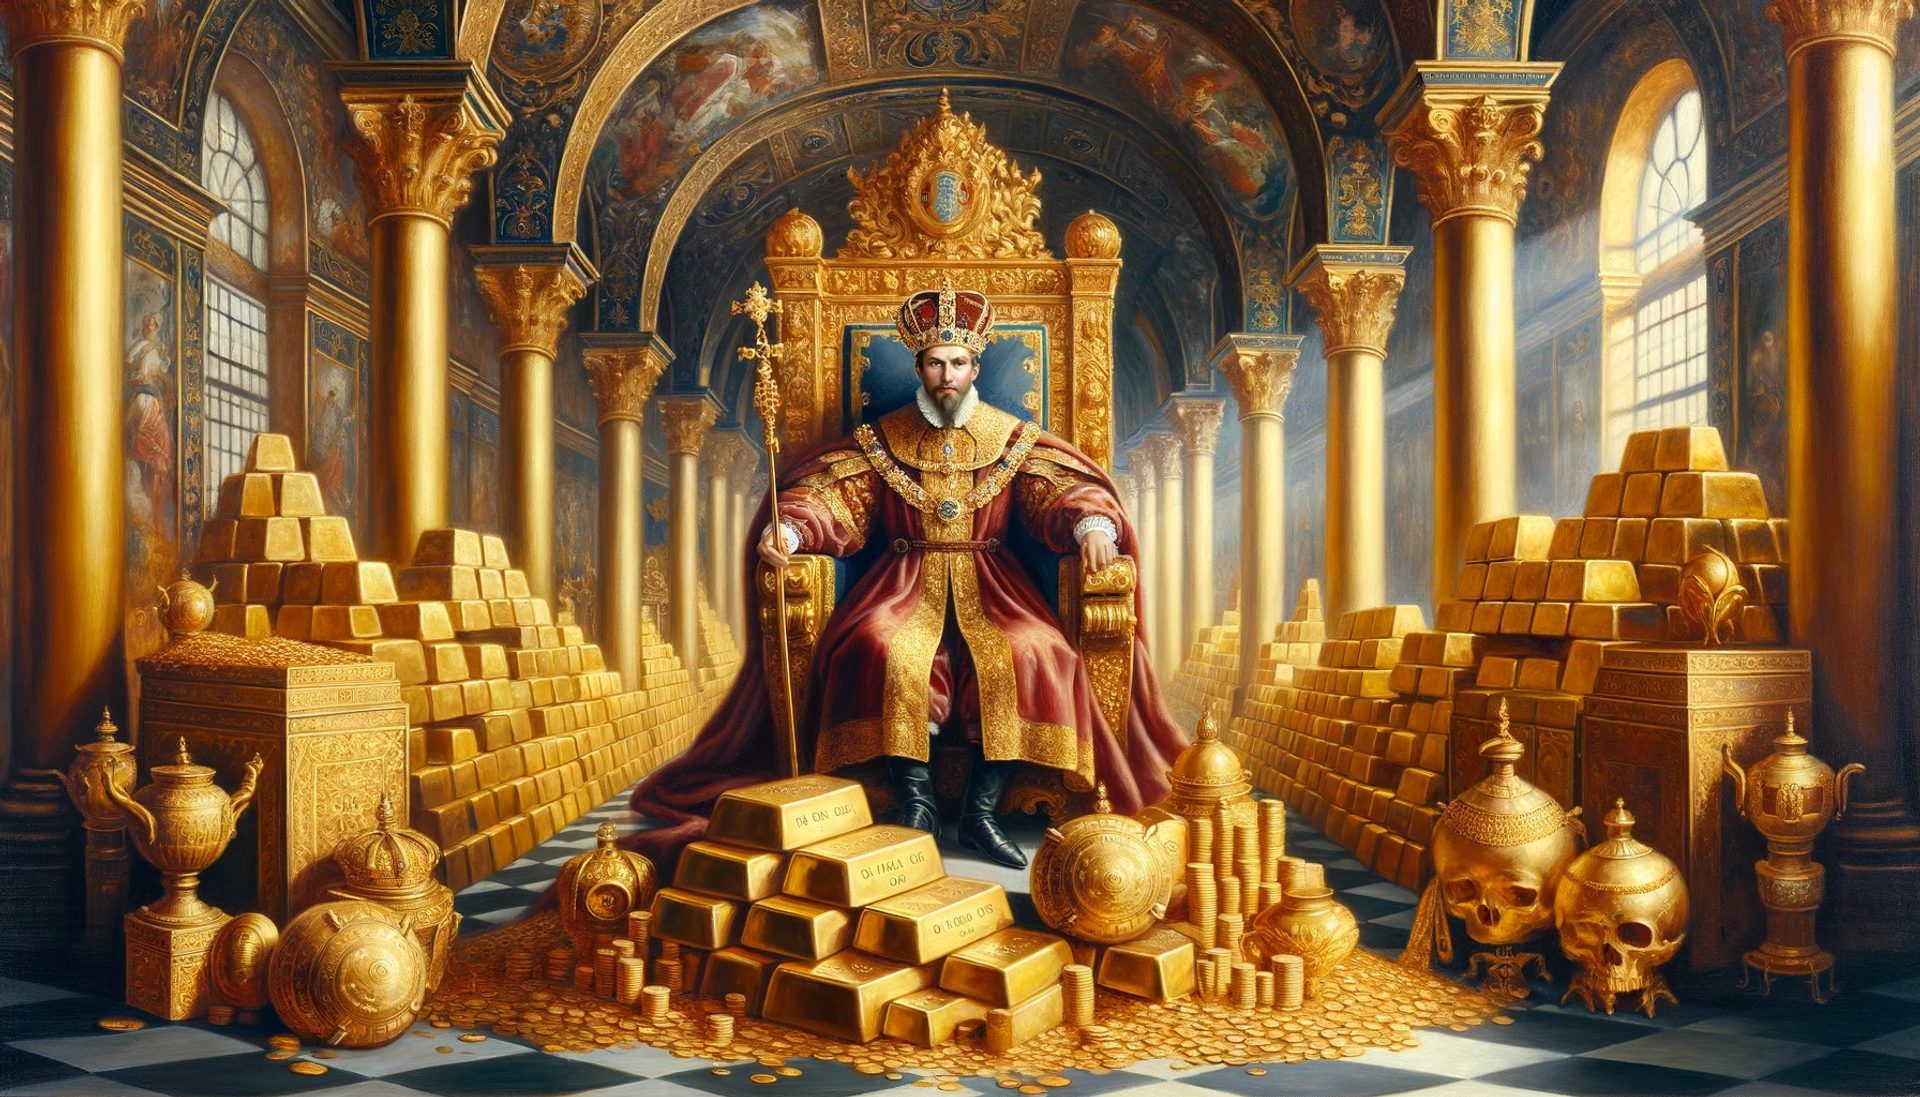 A monarch surrounded by abundant reserves of gold. At a time when gold was the main indicator of wealth, every monarch wanted more and more of it.